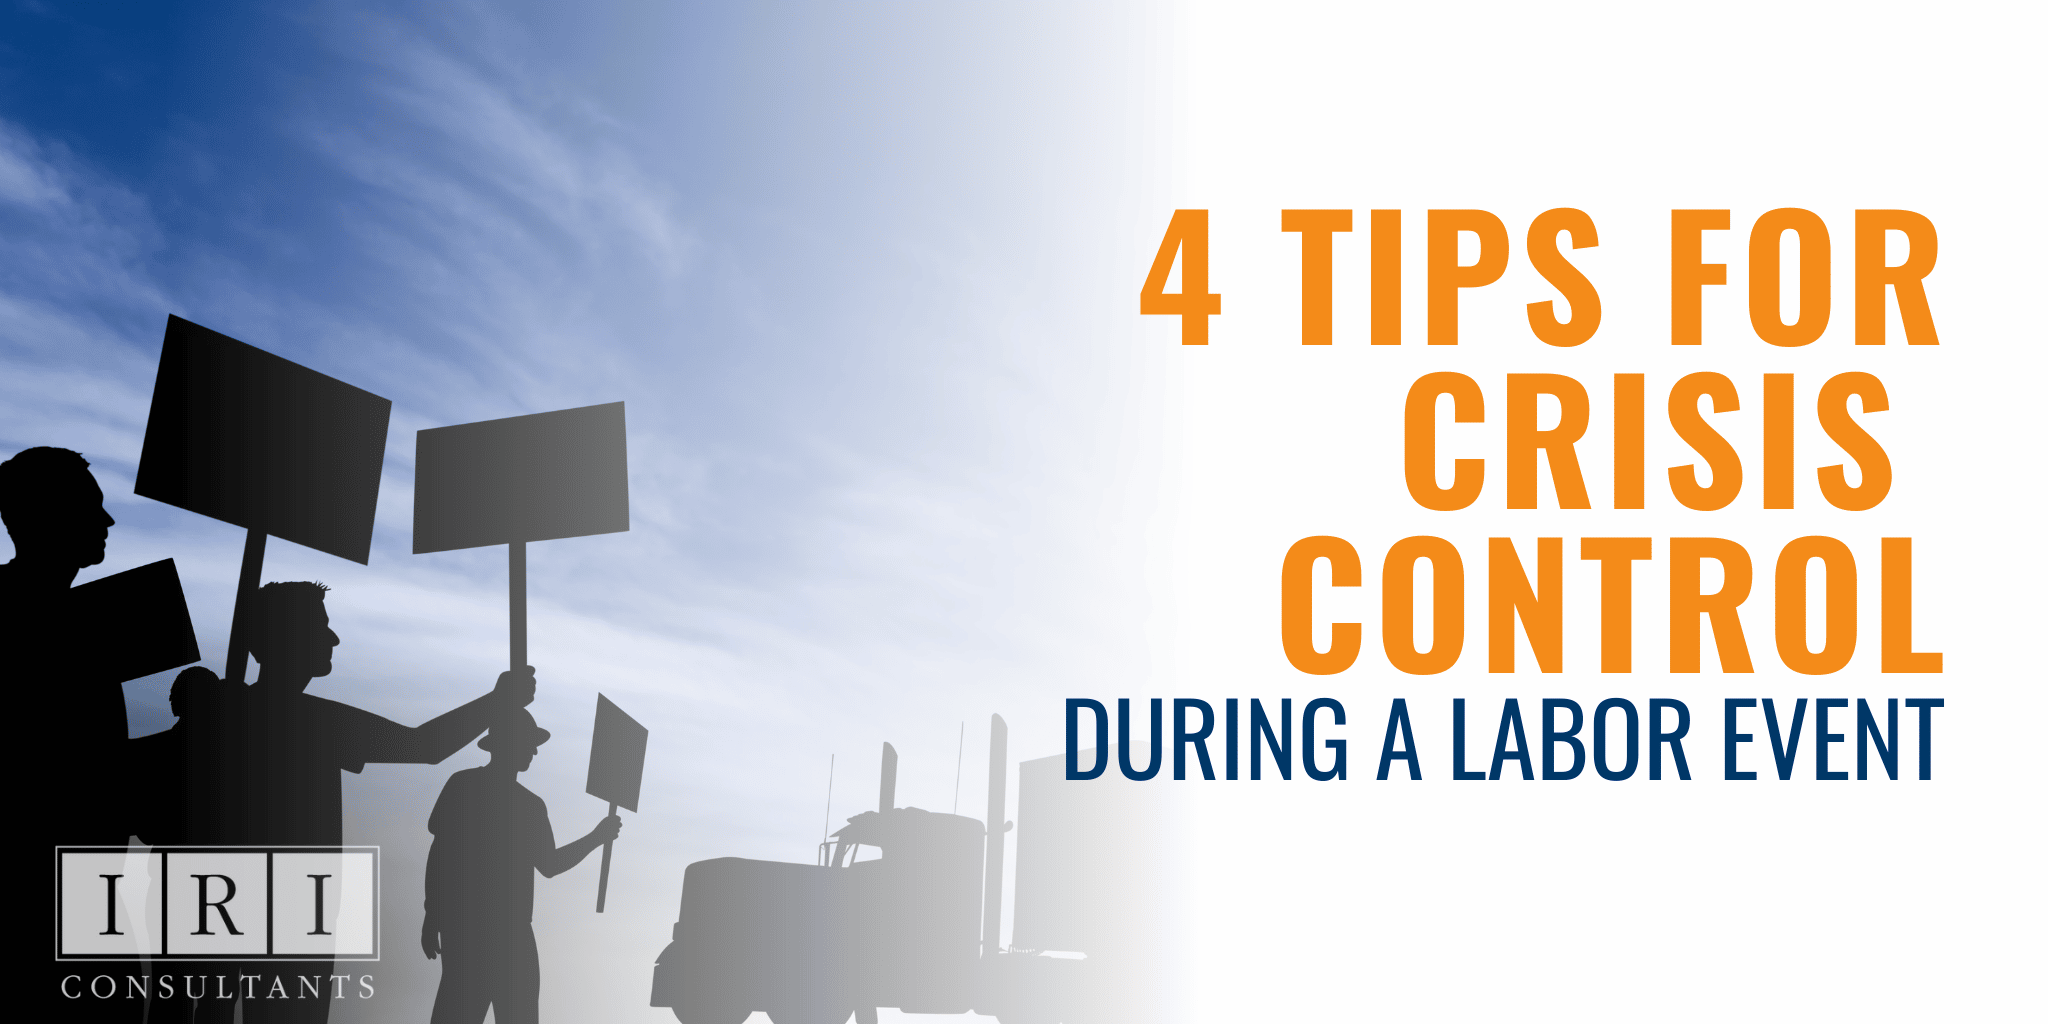 4 Tips for Crisis Control During A Labor Event